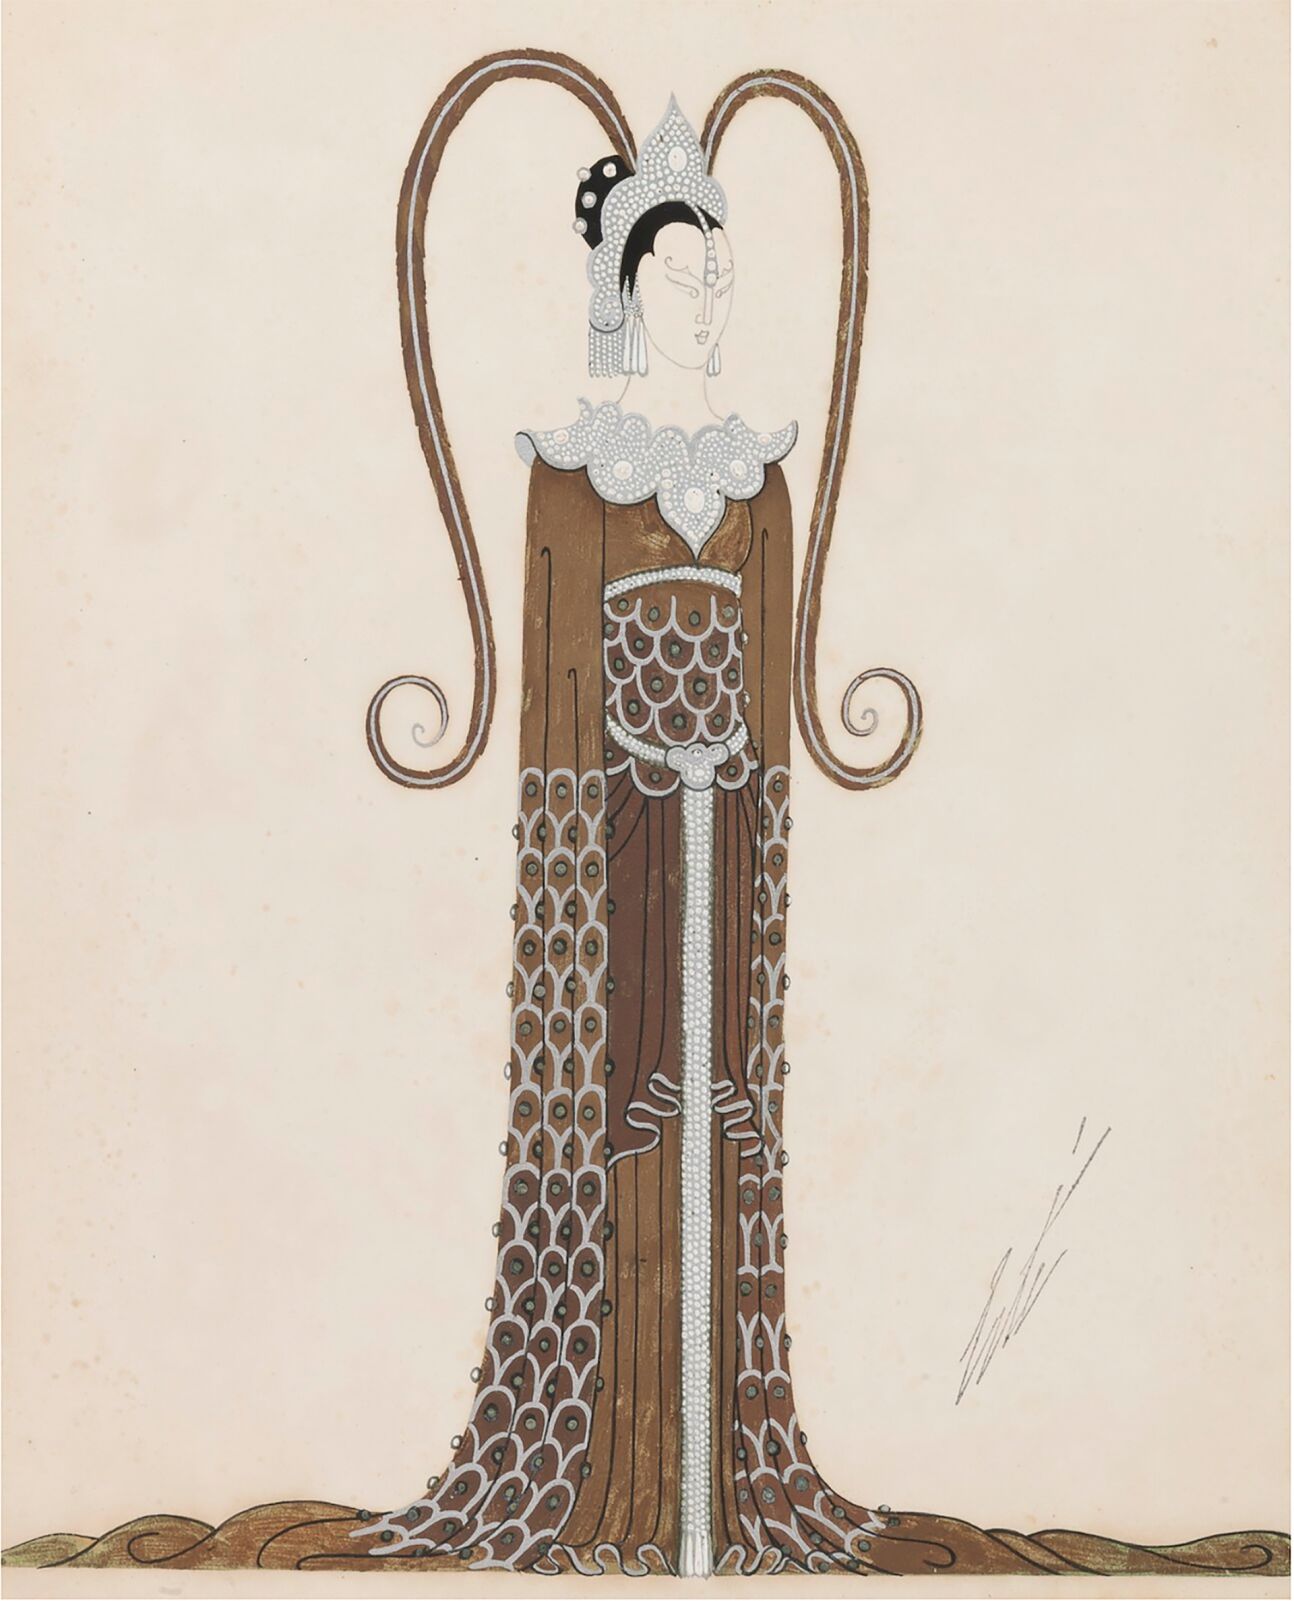 The Erté show on Royal St., an Art Deco delight not to miss